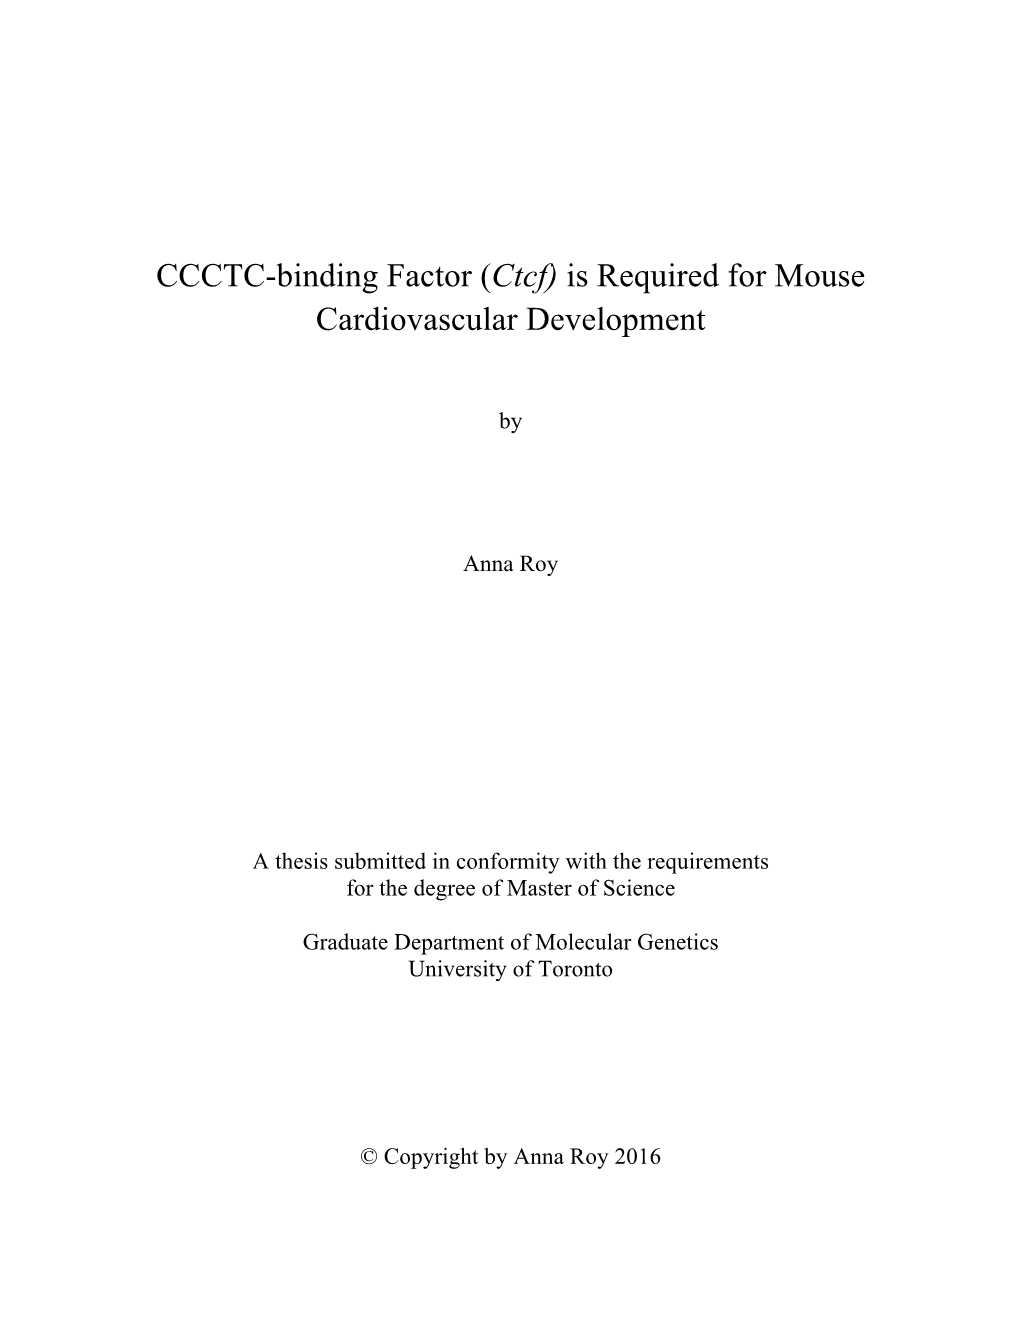 CCCTC-Binding Factor (Ctcf) Is Required for Mouse Cardiovascular Development